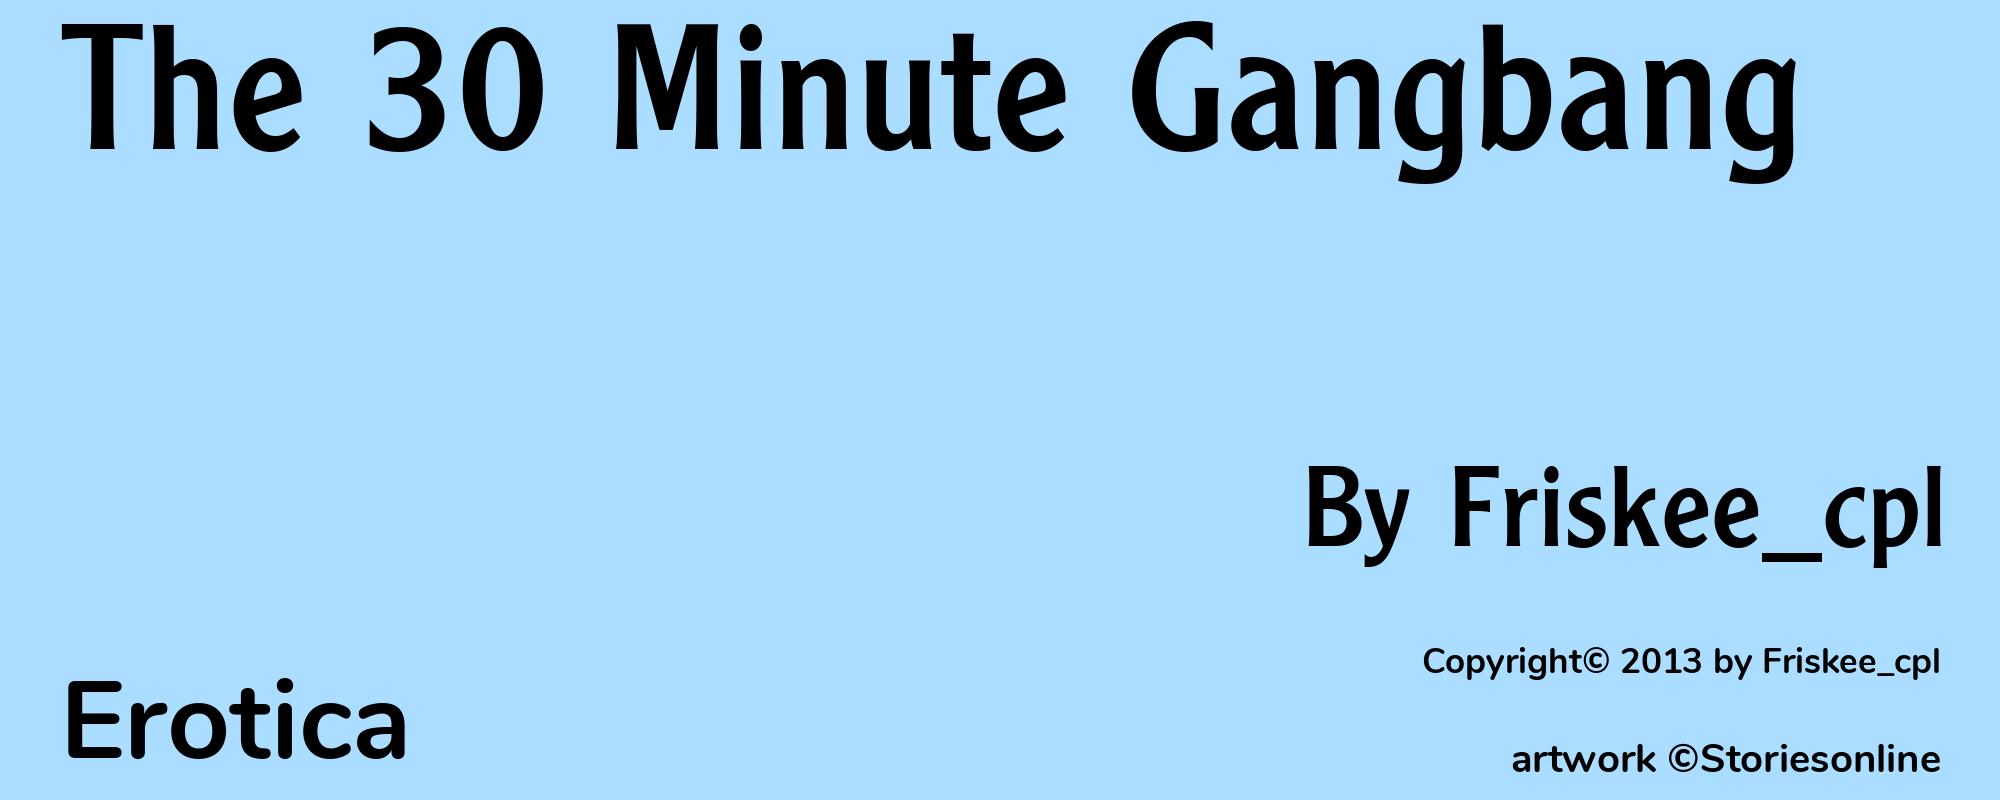 The 30 Minute Gangbang - Cover